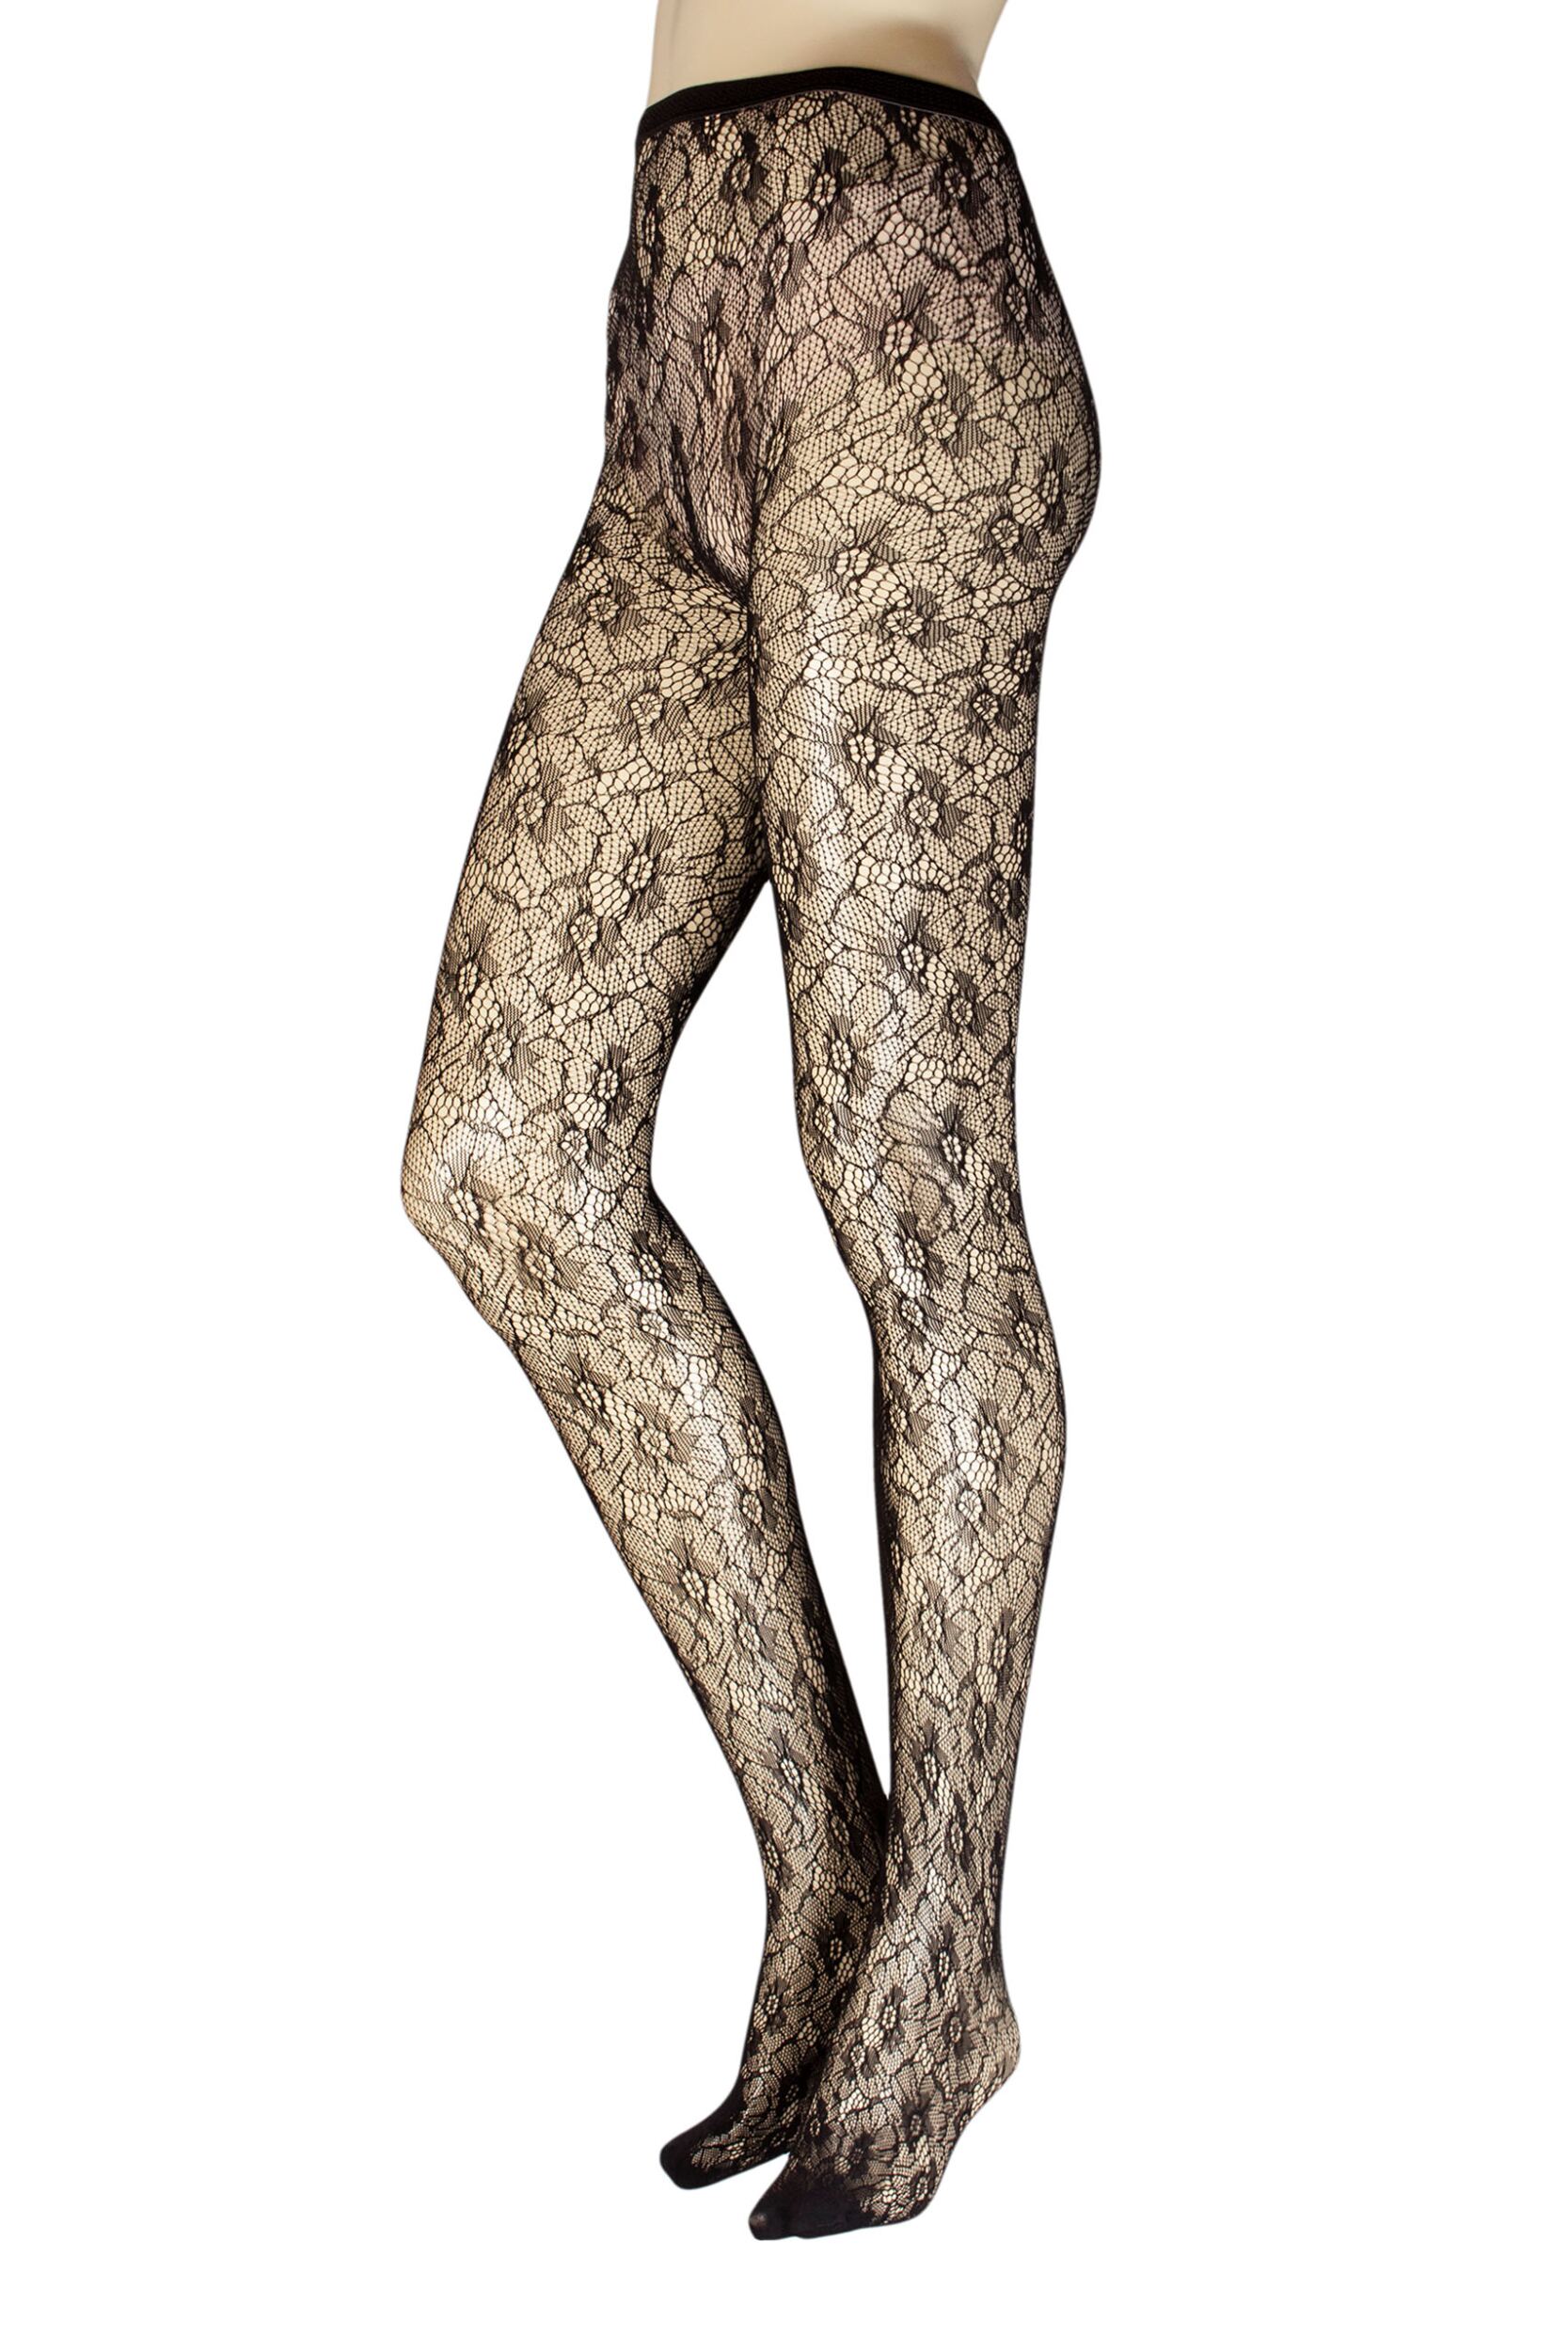 Ladies 1 Pair Trasparenze Licorice Floral Net Tights Black Large / Extra Large